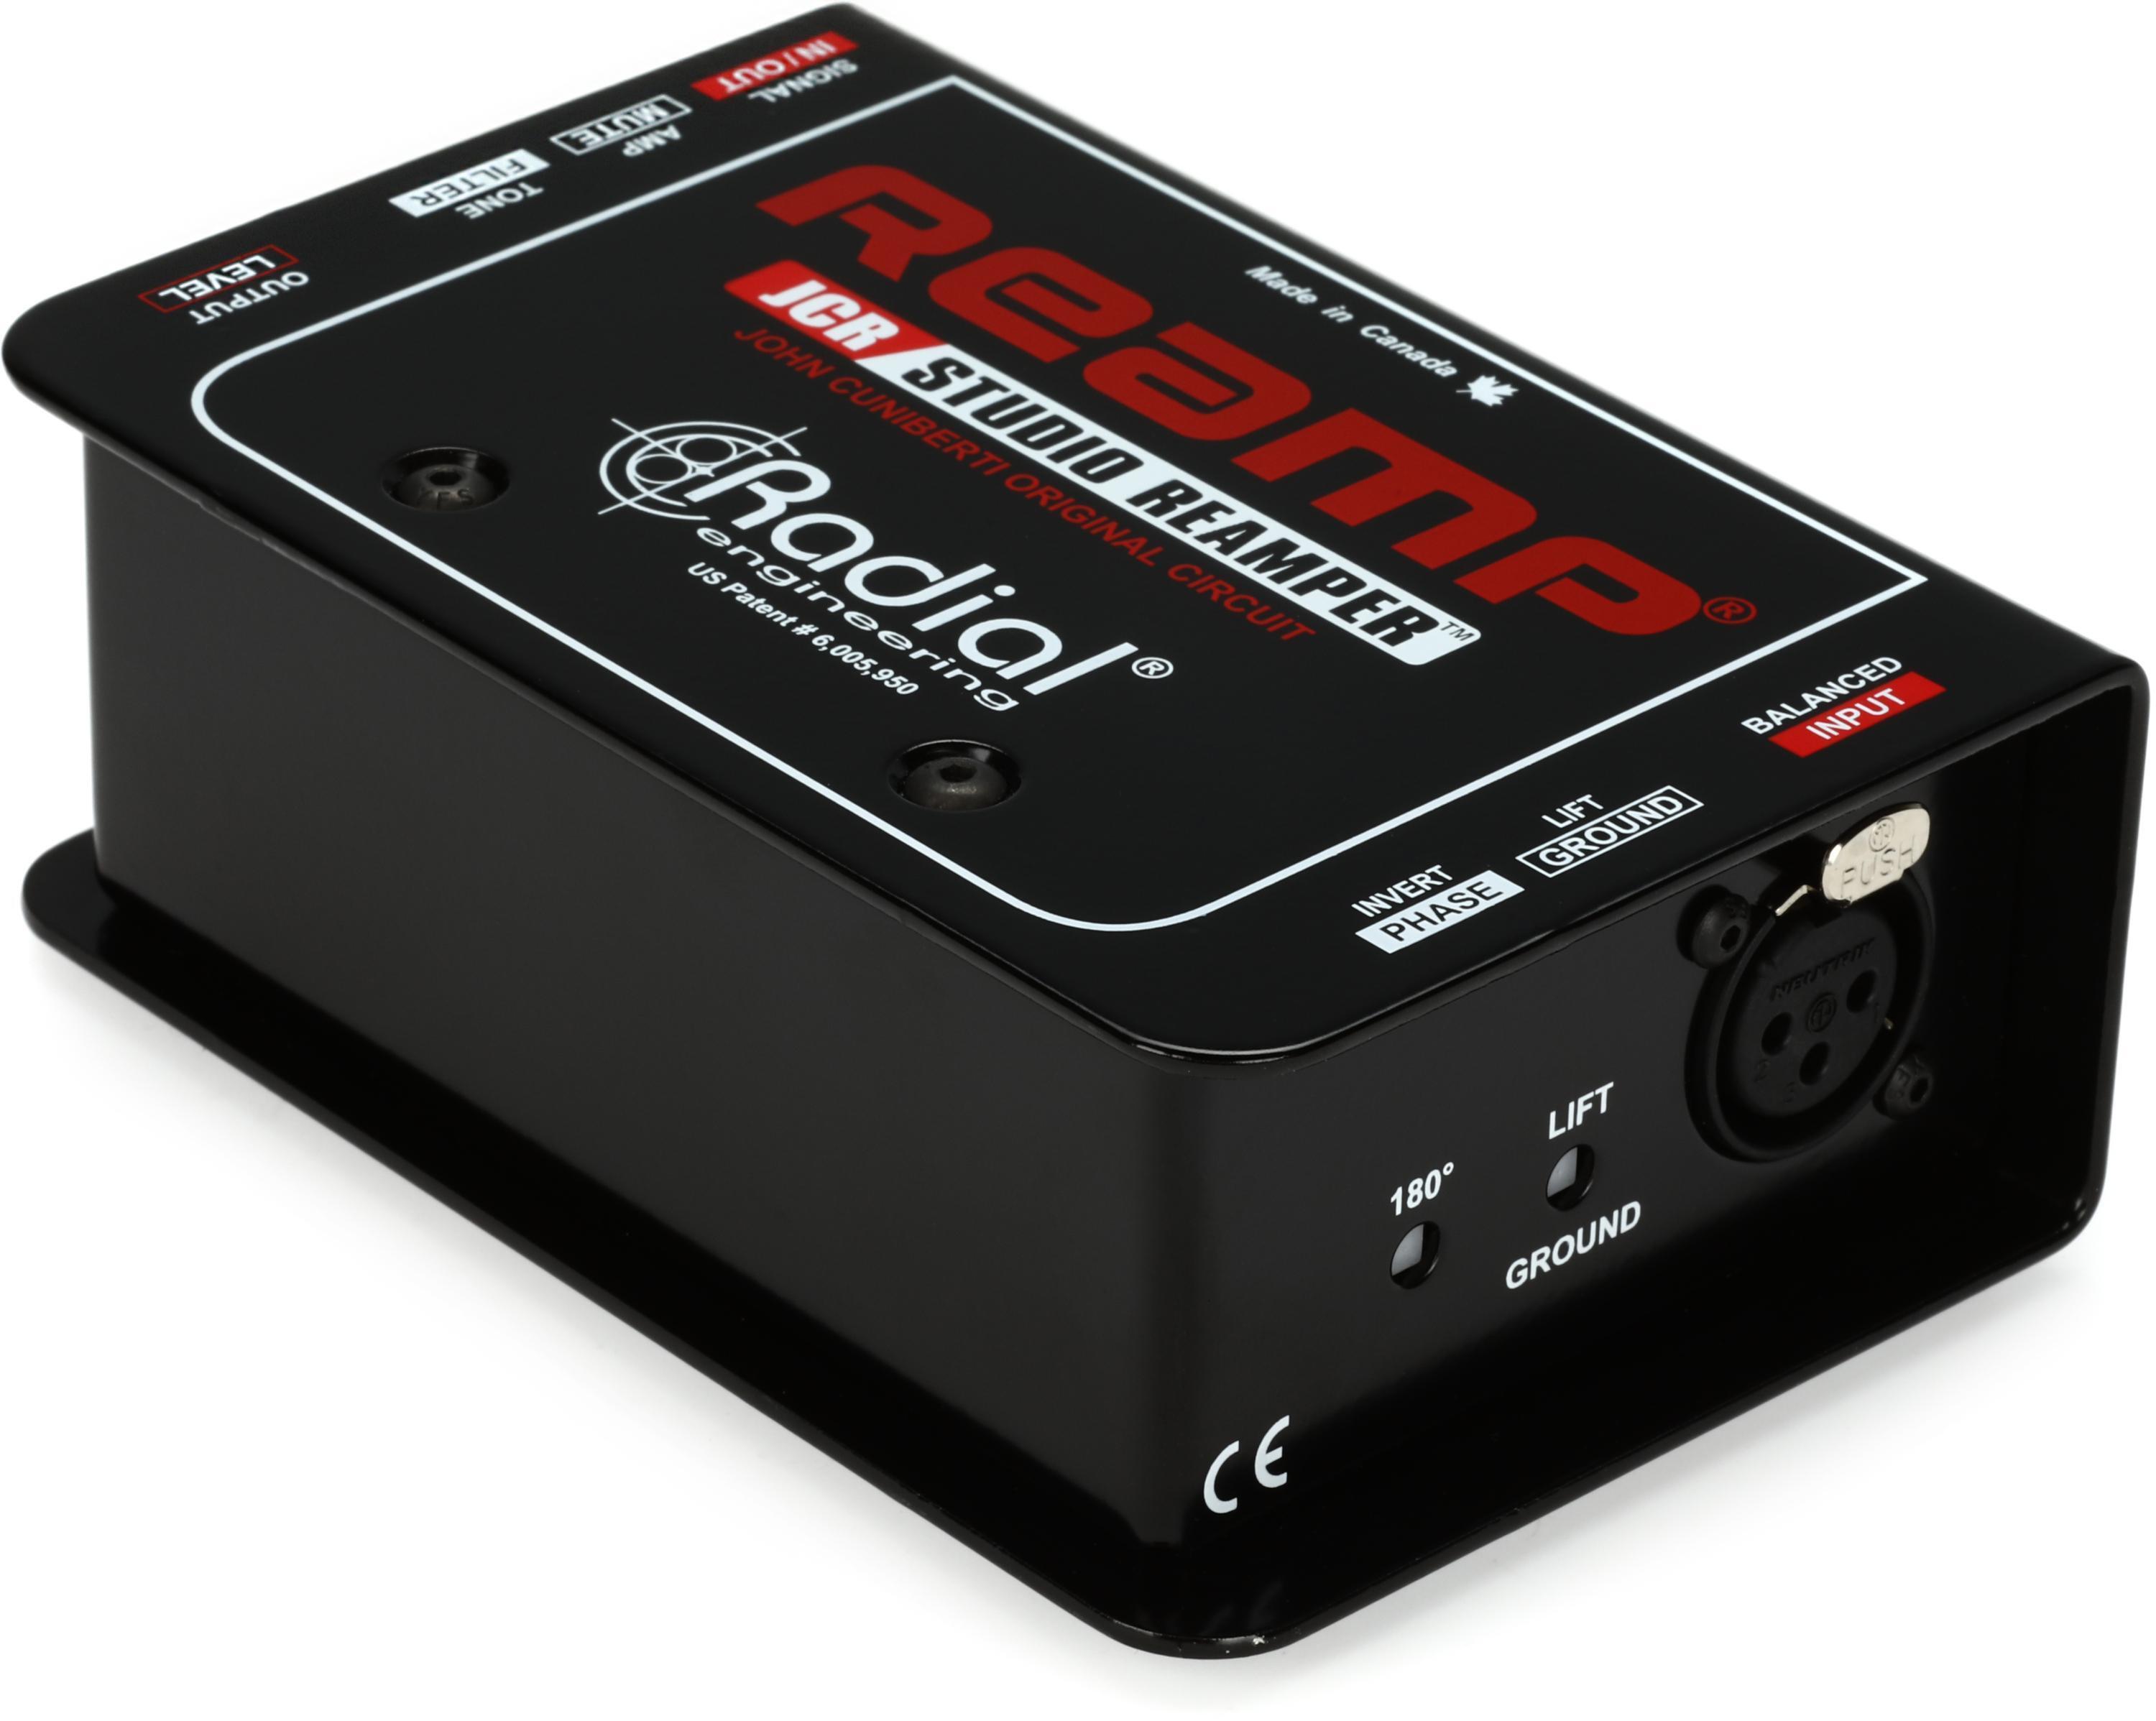 Radial Reamp JCR 1-channel Passive Re-Amping Device | Sweetwater